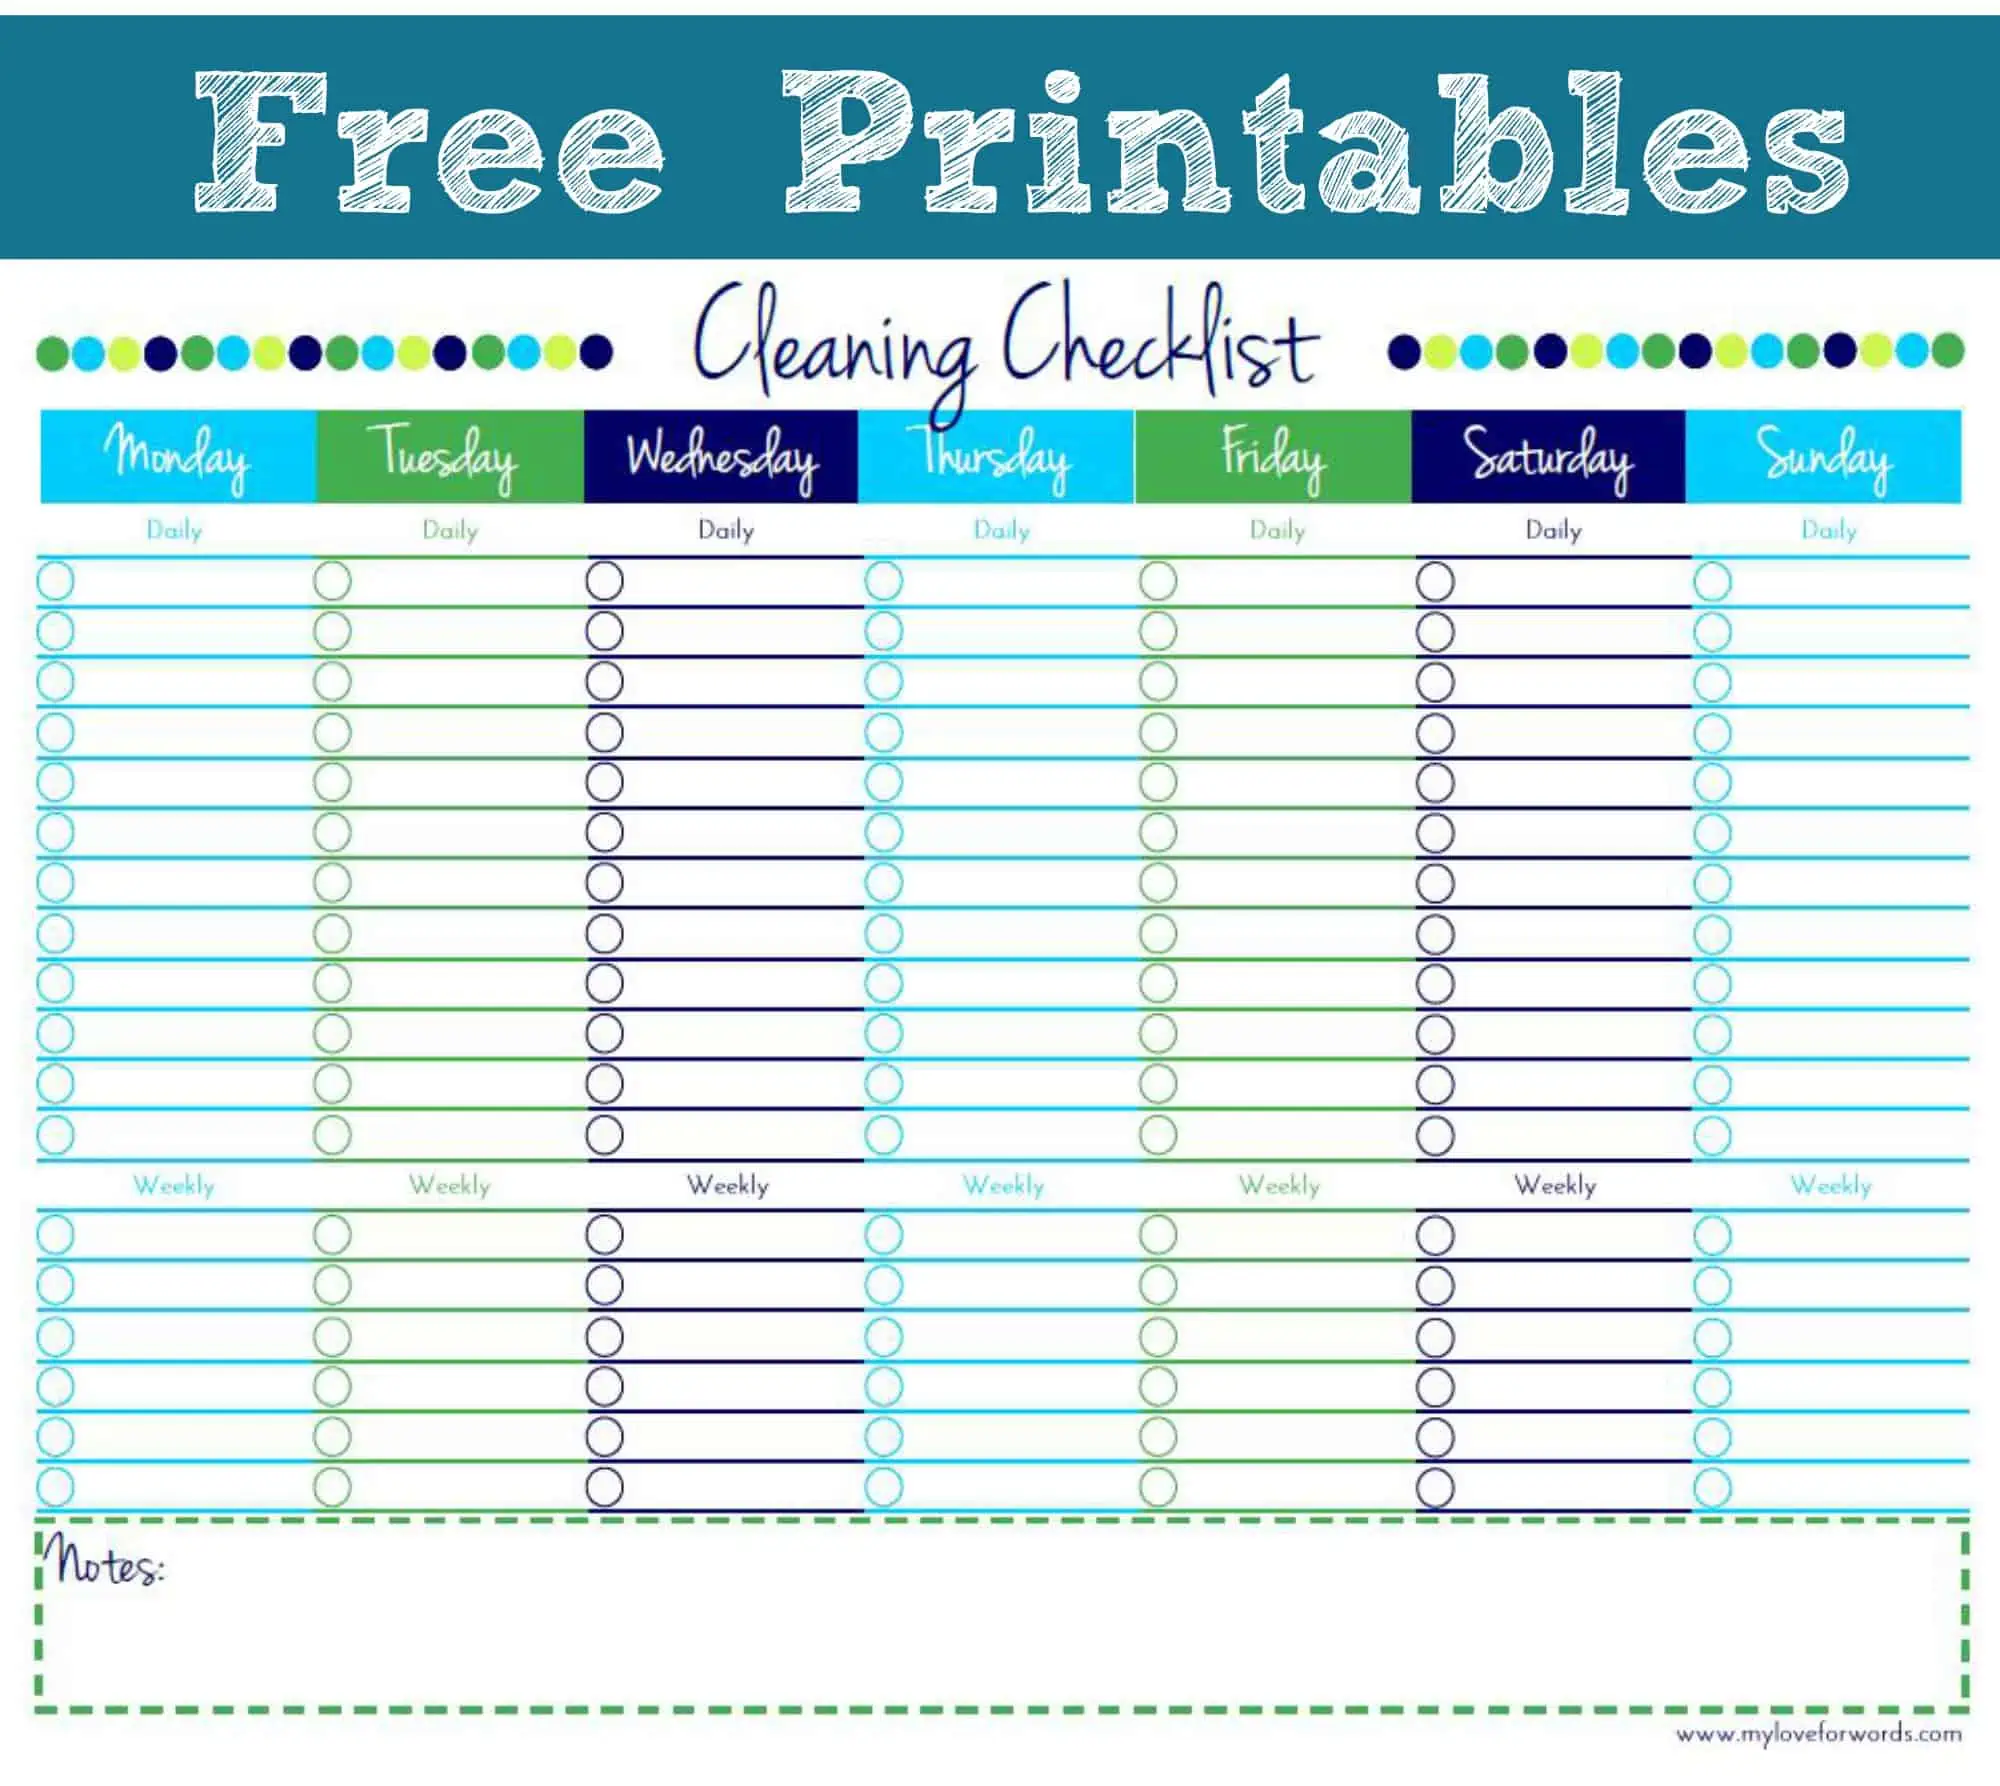 Cleaning Checklist Free Printables